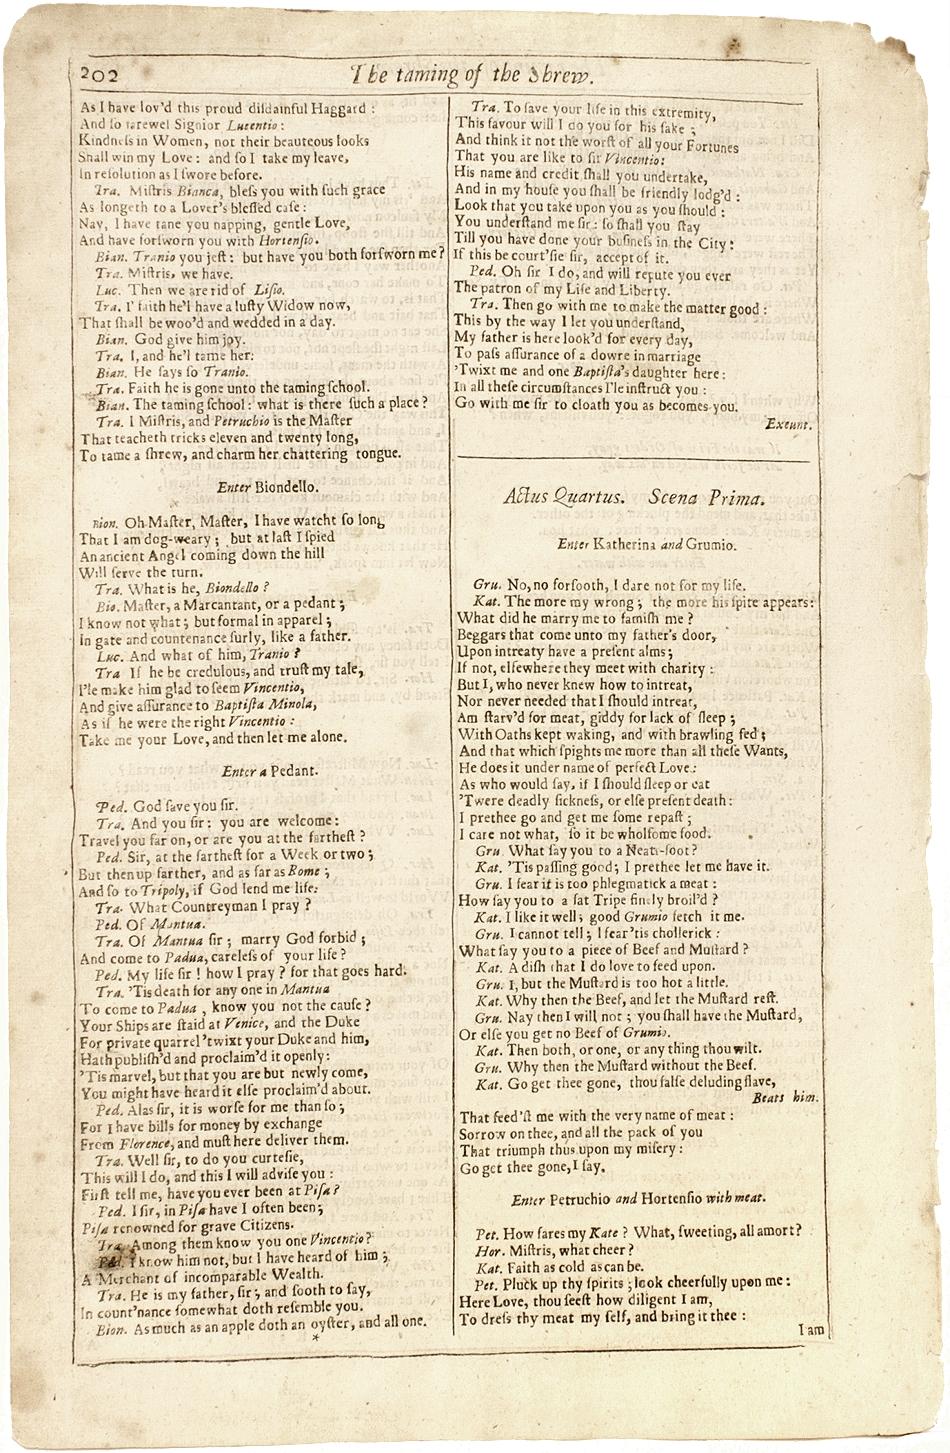 Author: SHAKESPEARE, William. 

Title: The Works of William Shakespeare. (The Taming Of The Shrew) - page 201-202. 

Publisher: London: Printed for H. Herringman, E. Brewster and R. Bentley, 1685.

Description: THE FOURTH FOLIO. 201-202 p., 1